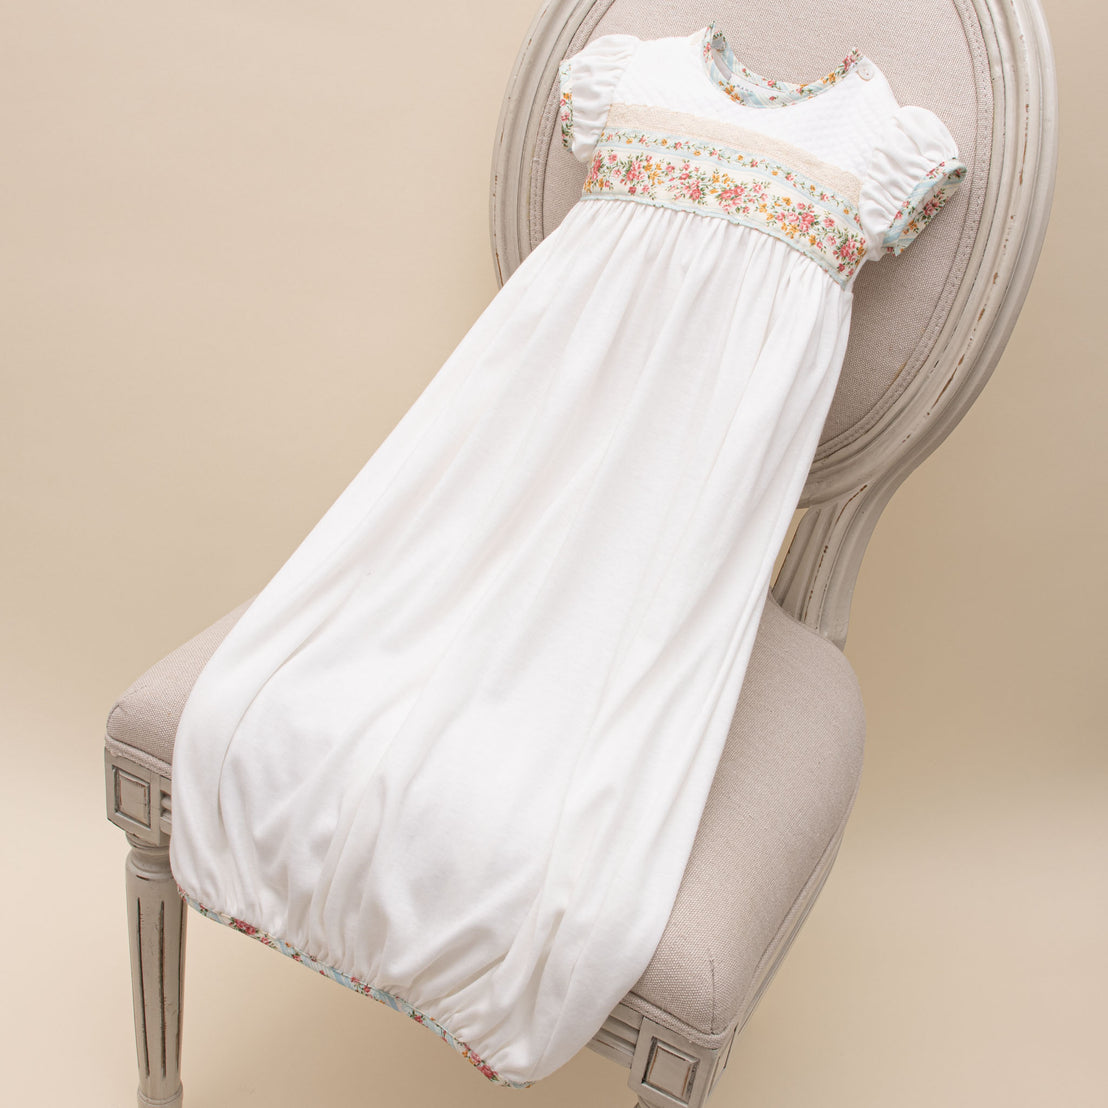 Flat lay of the Eloise Layette Gown in "Powder Blue". Details show the white pima cotton sleeves with white quilted textured cotton bodice. The gown features cotton lace, as well as, floral and striped cotton bodice details. Button closures are on both shoulders.